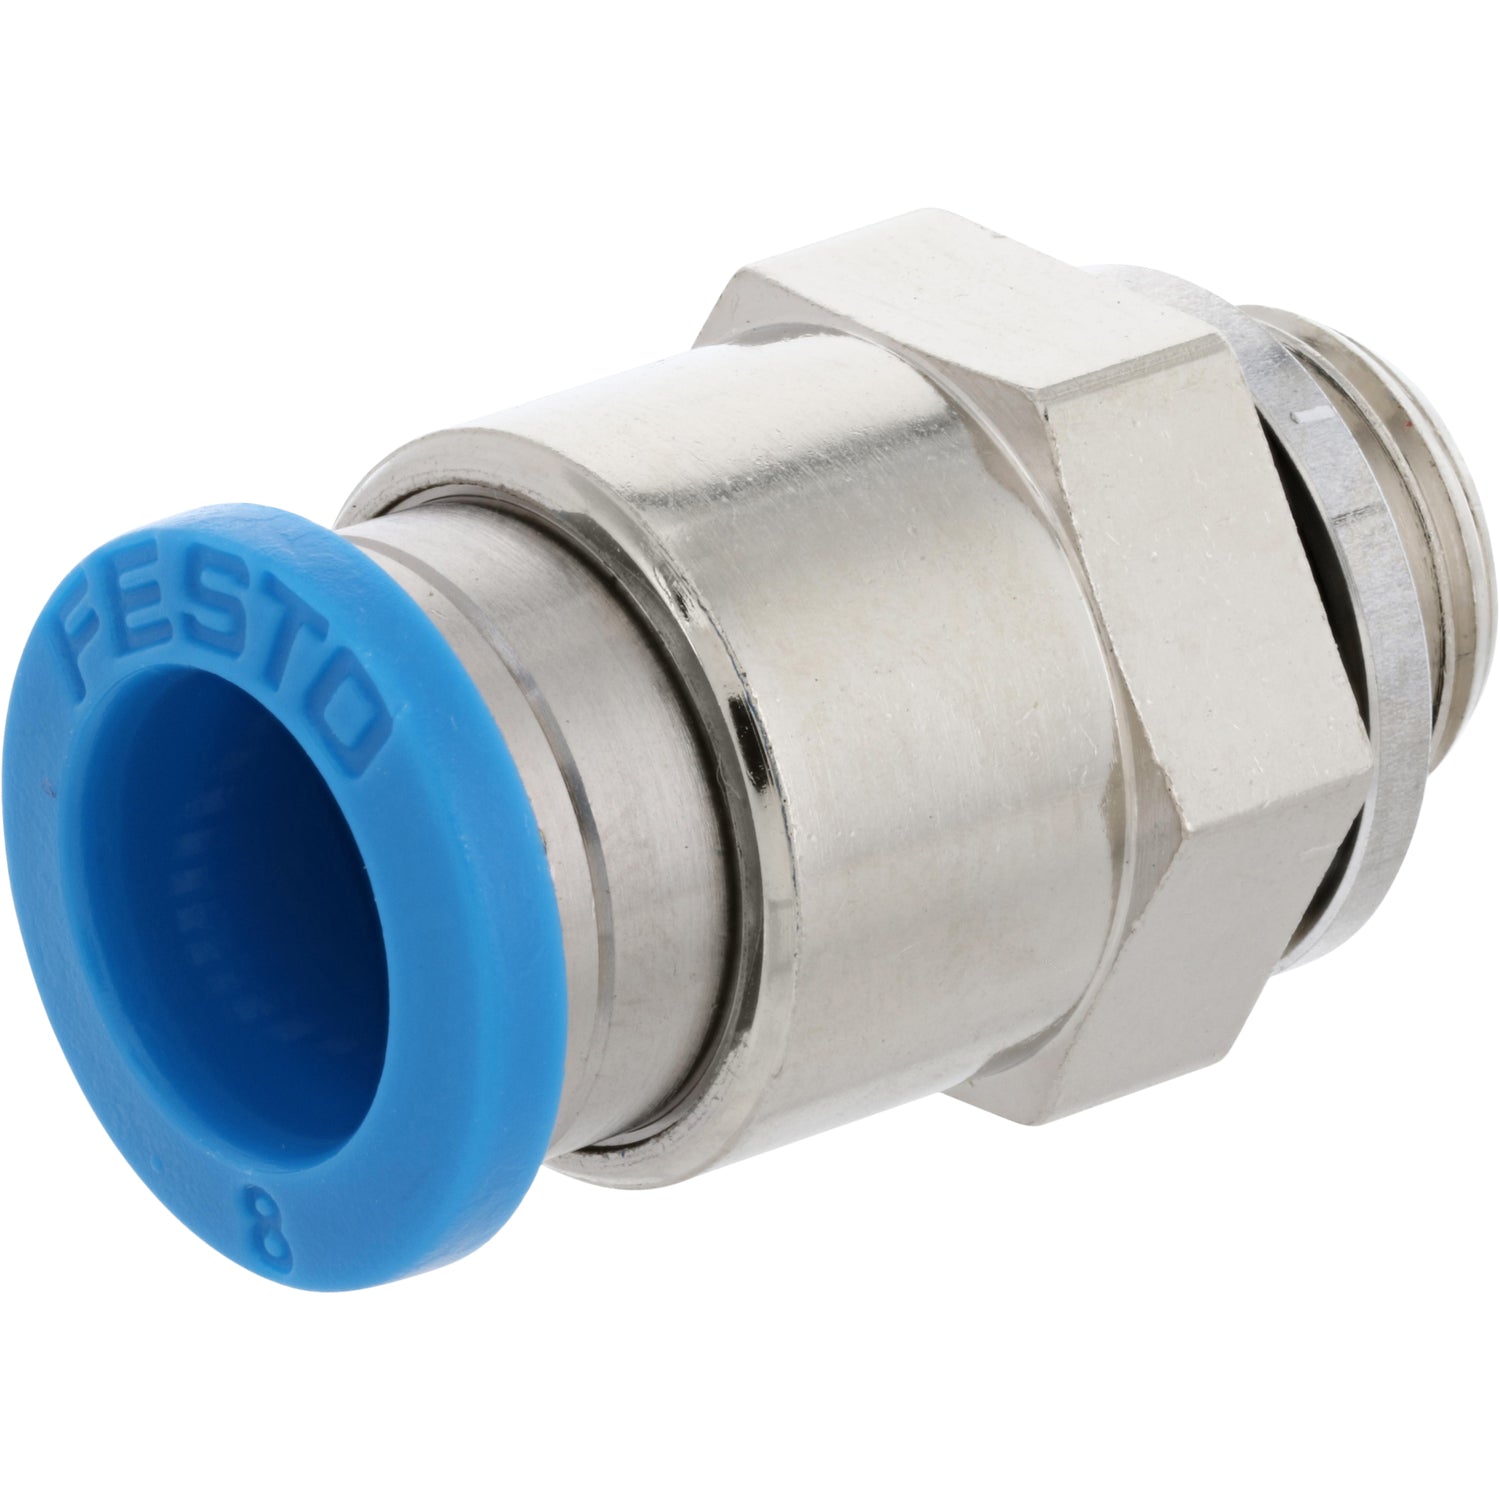 Nickel-plated push-in air fitting with blue collared releasing ring showing. Part on white background.